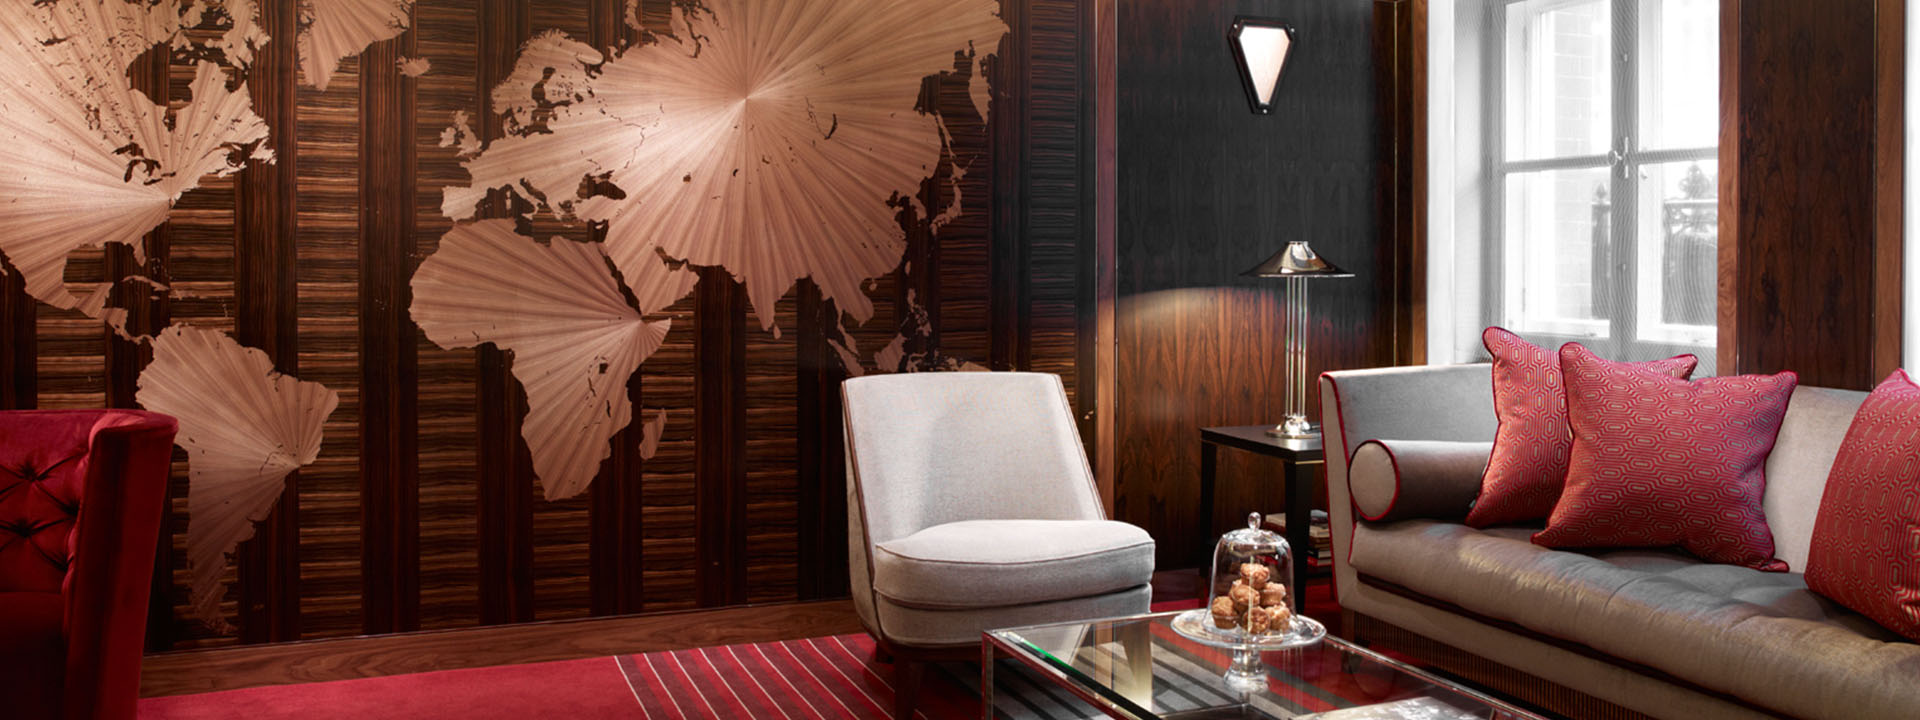 A view of the Claridge's Map Room wall and armchair with a comfortable sofa in shades of red.